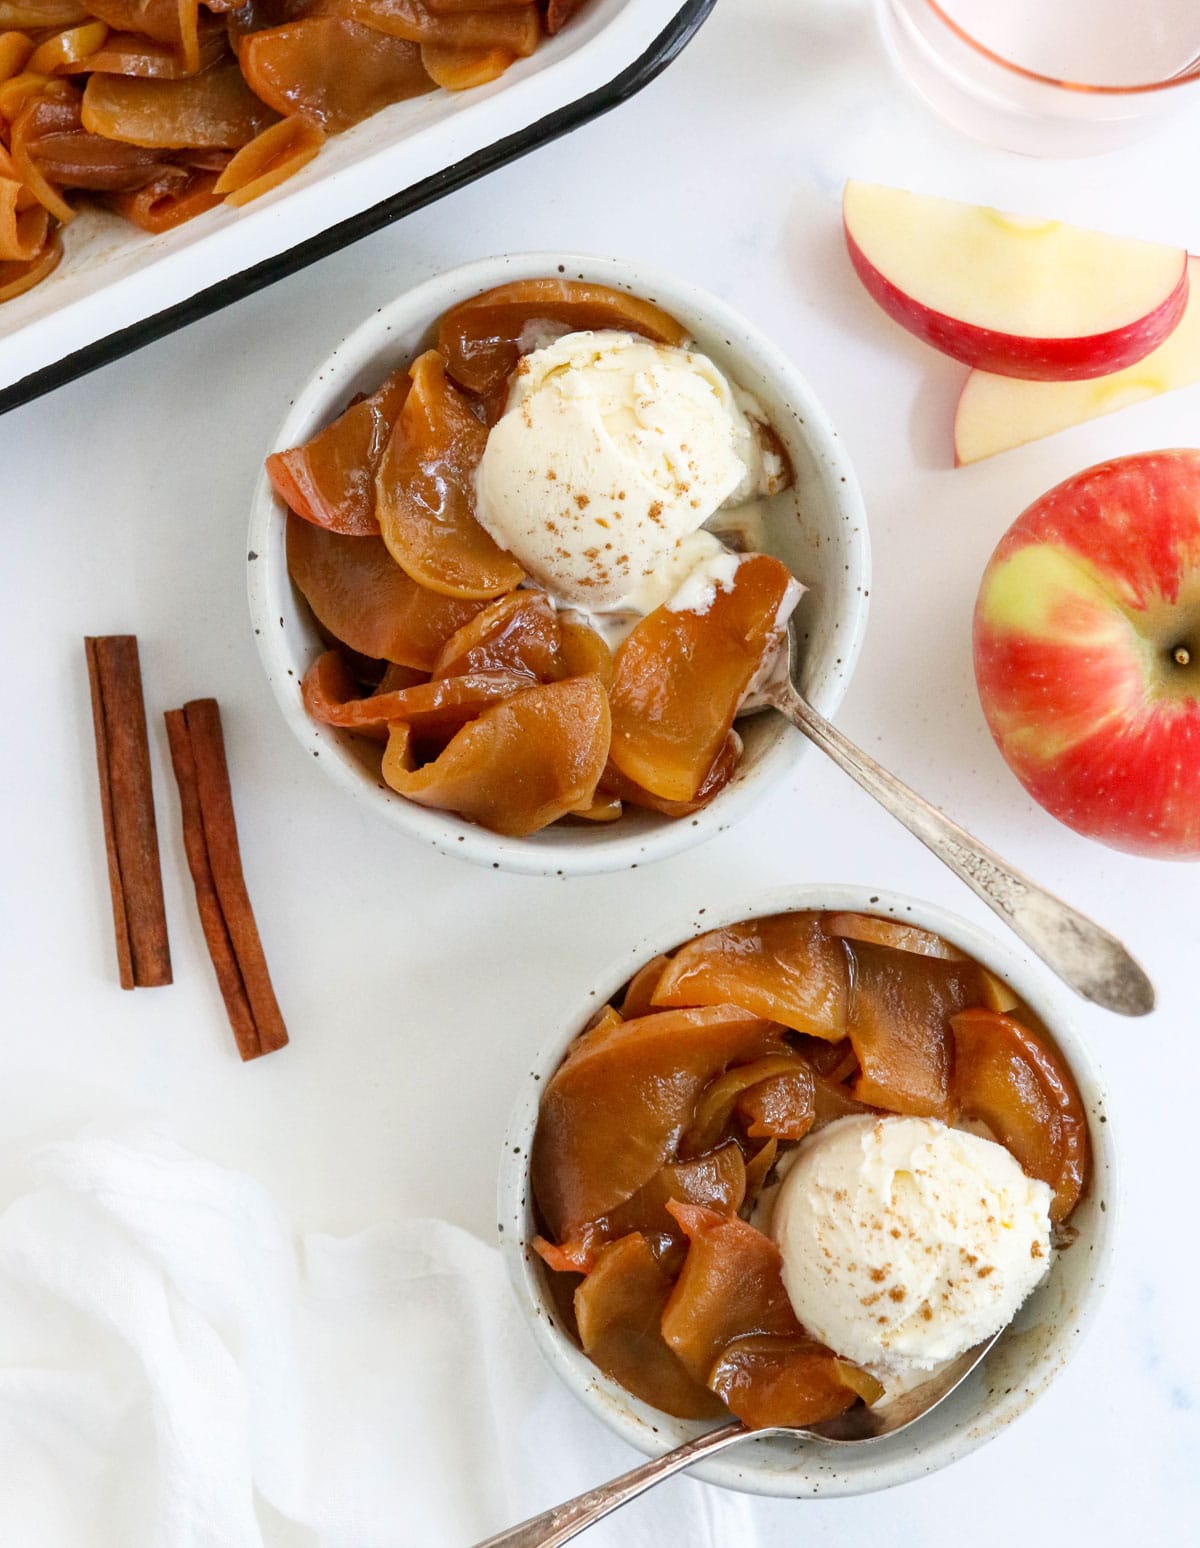 baked apples served with ice cream